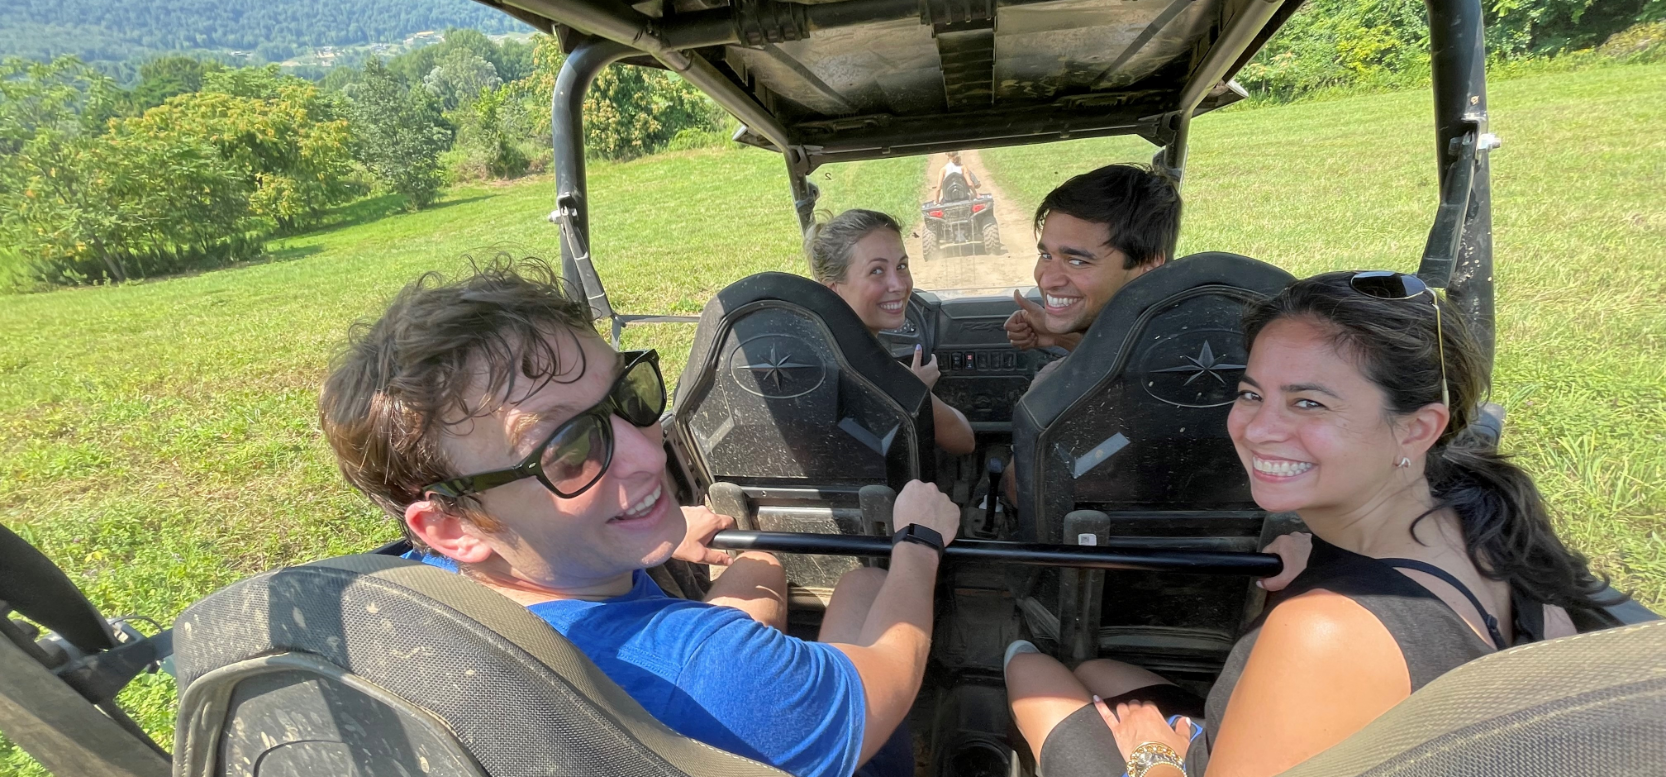 Four Viking employees in an open-air vehicle over a lush field of grass